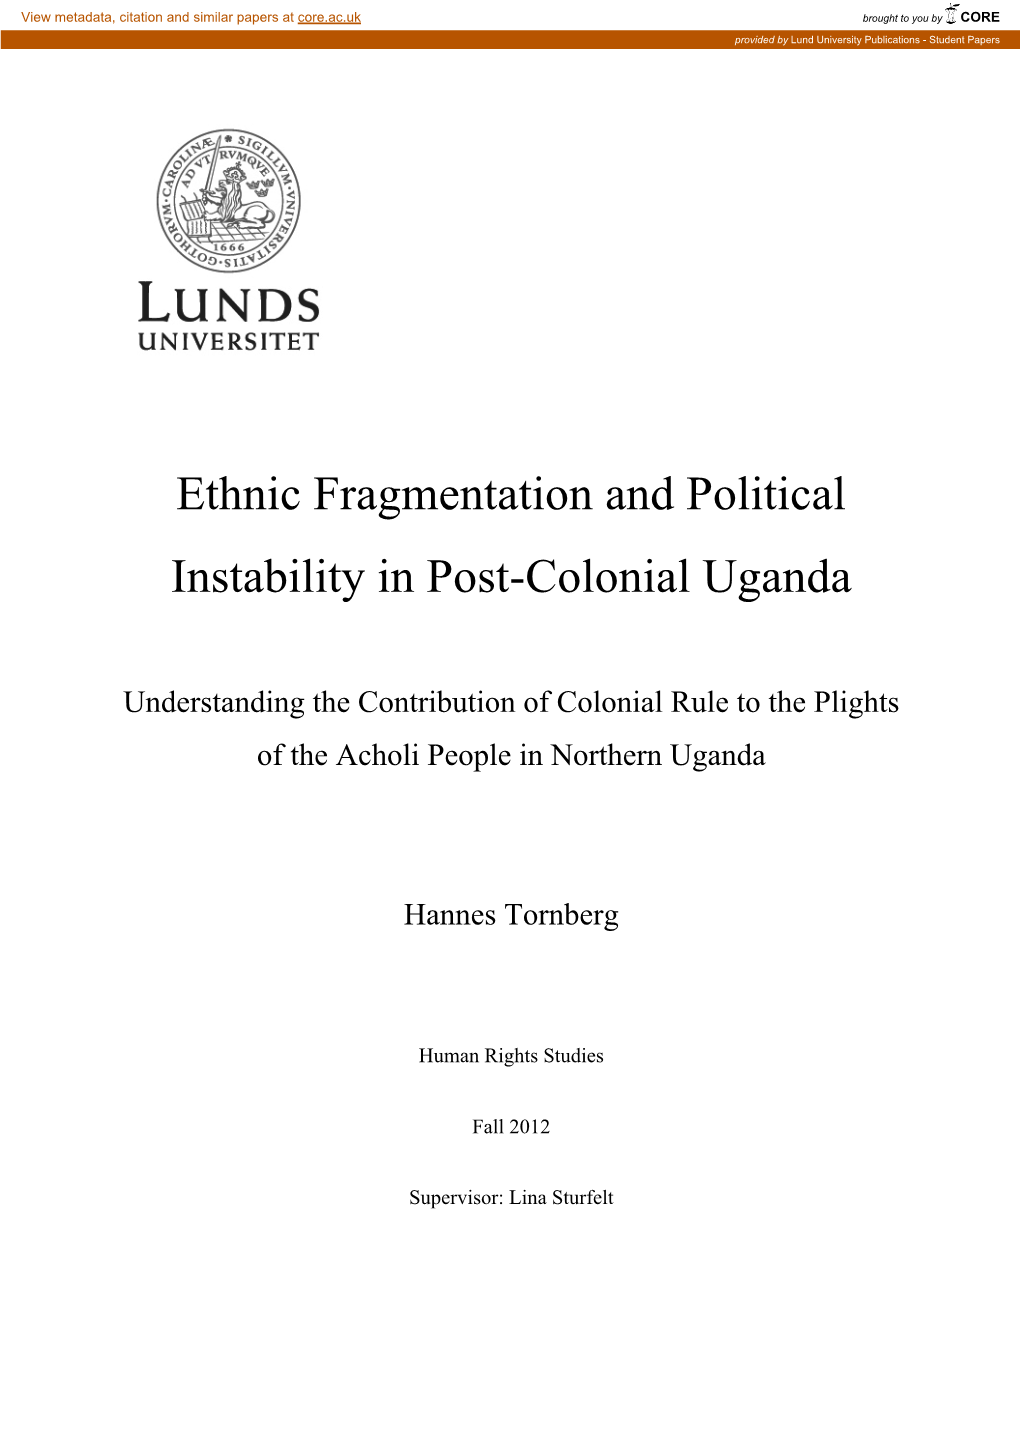 Ethnic Fragmentation and Political Instability in Post-Colonial Uganda